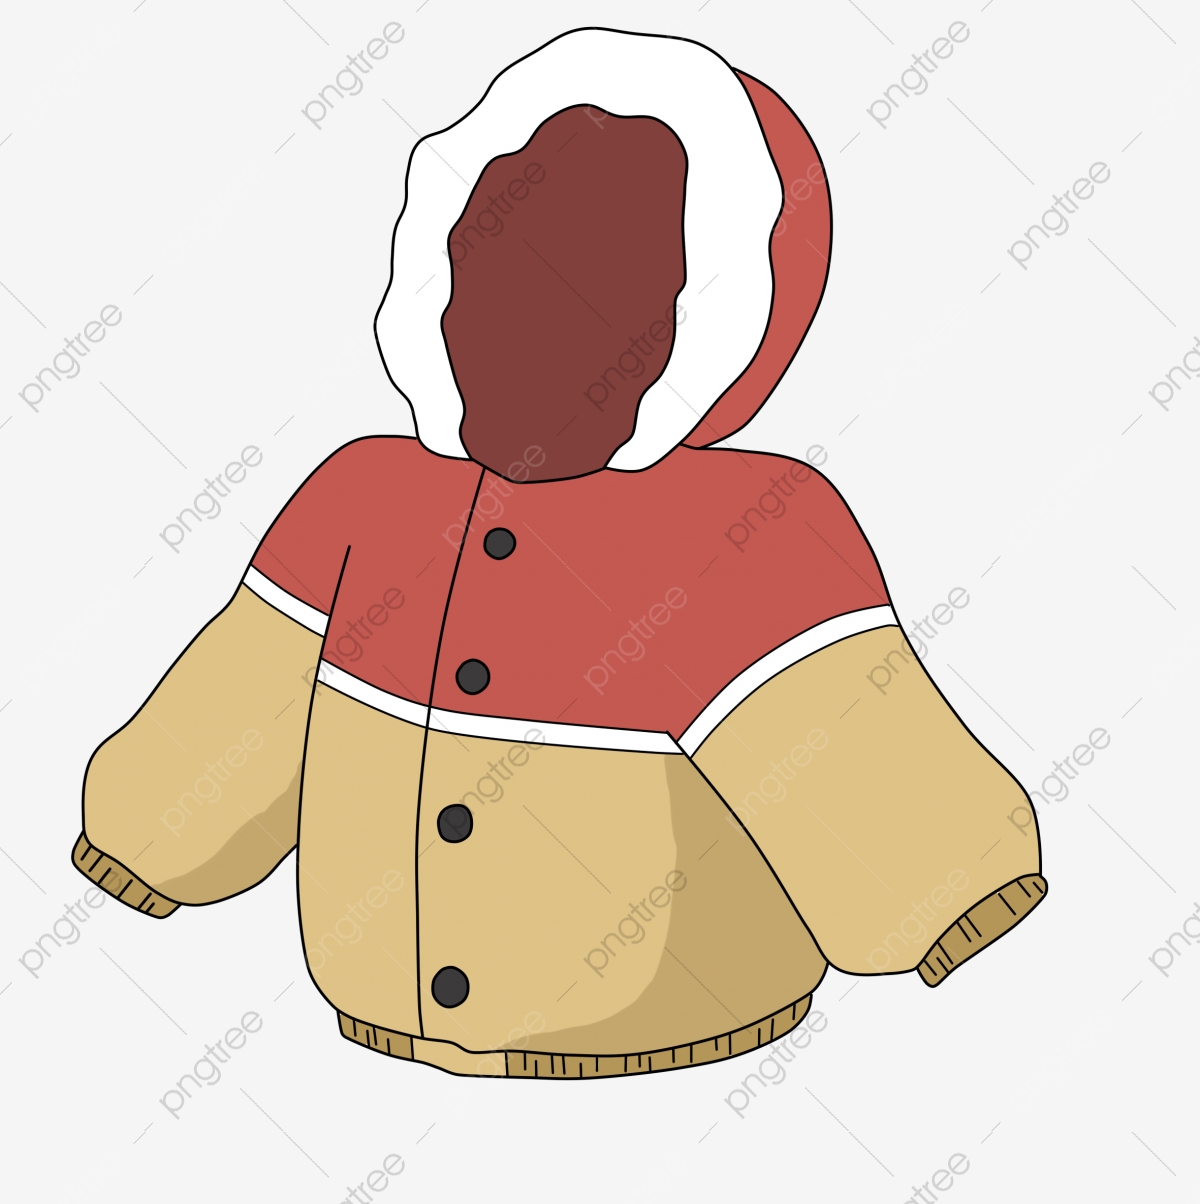 Jacket clipart coat hat. Cotton clothing contrast with